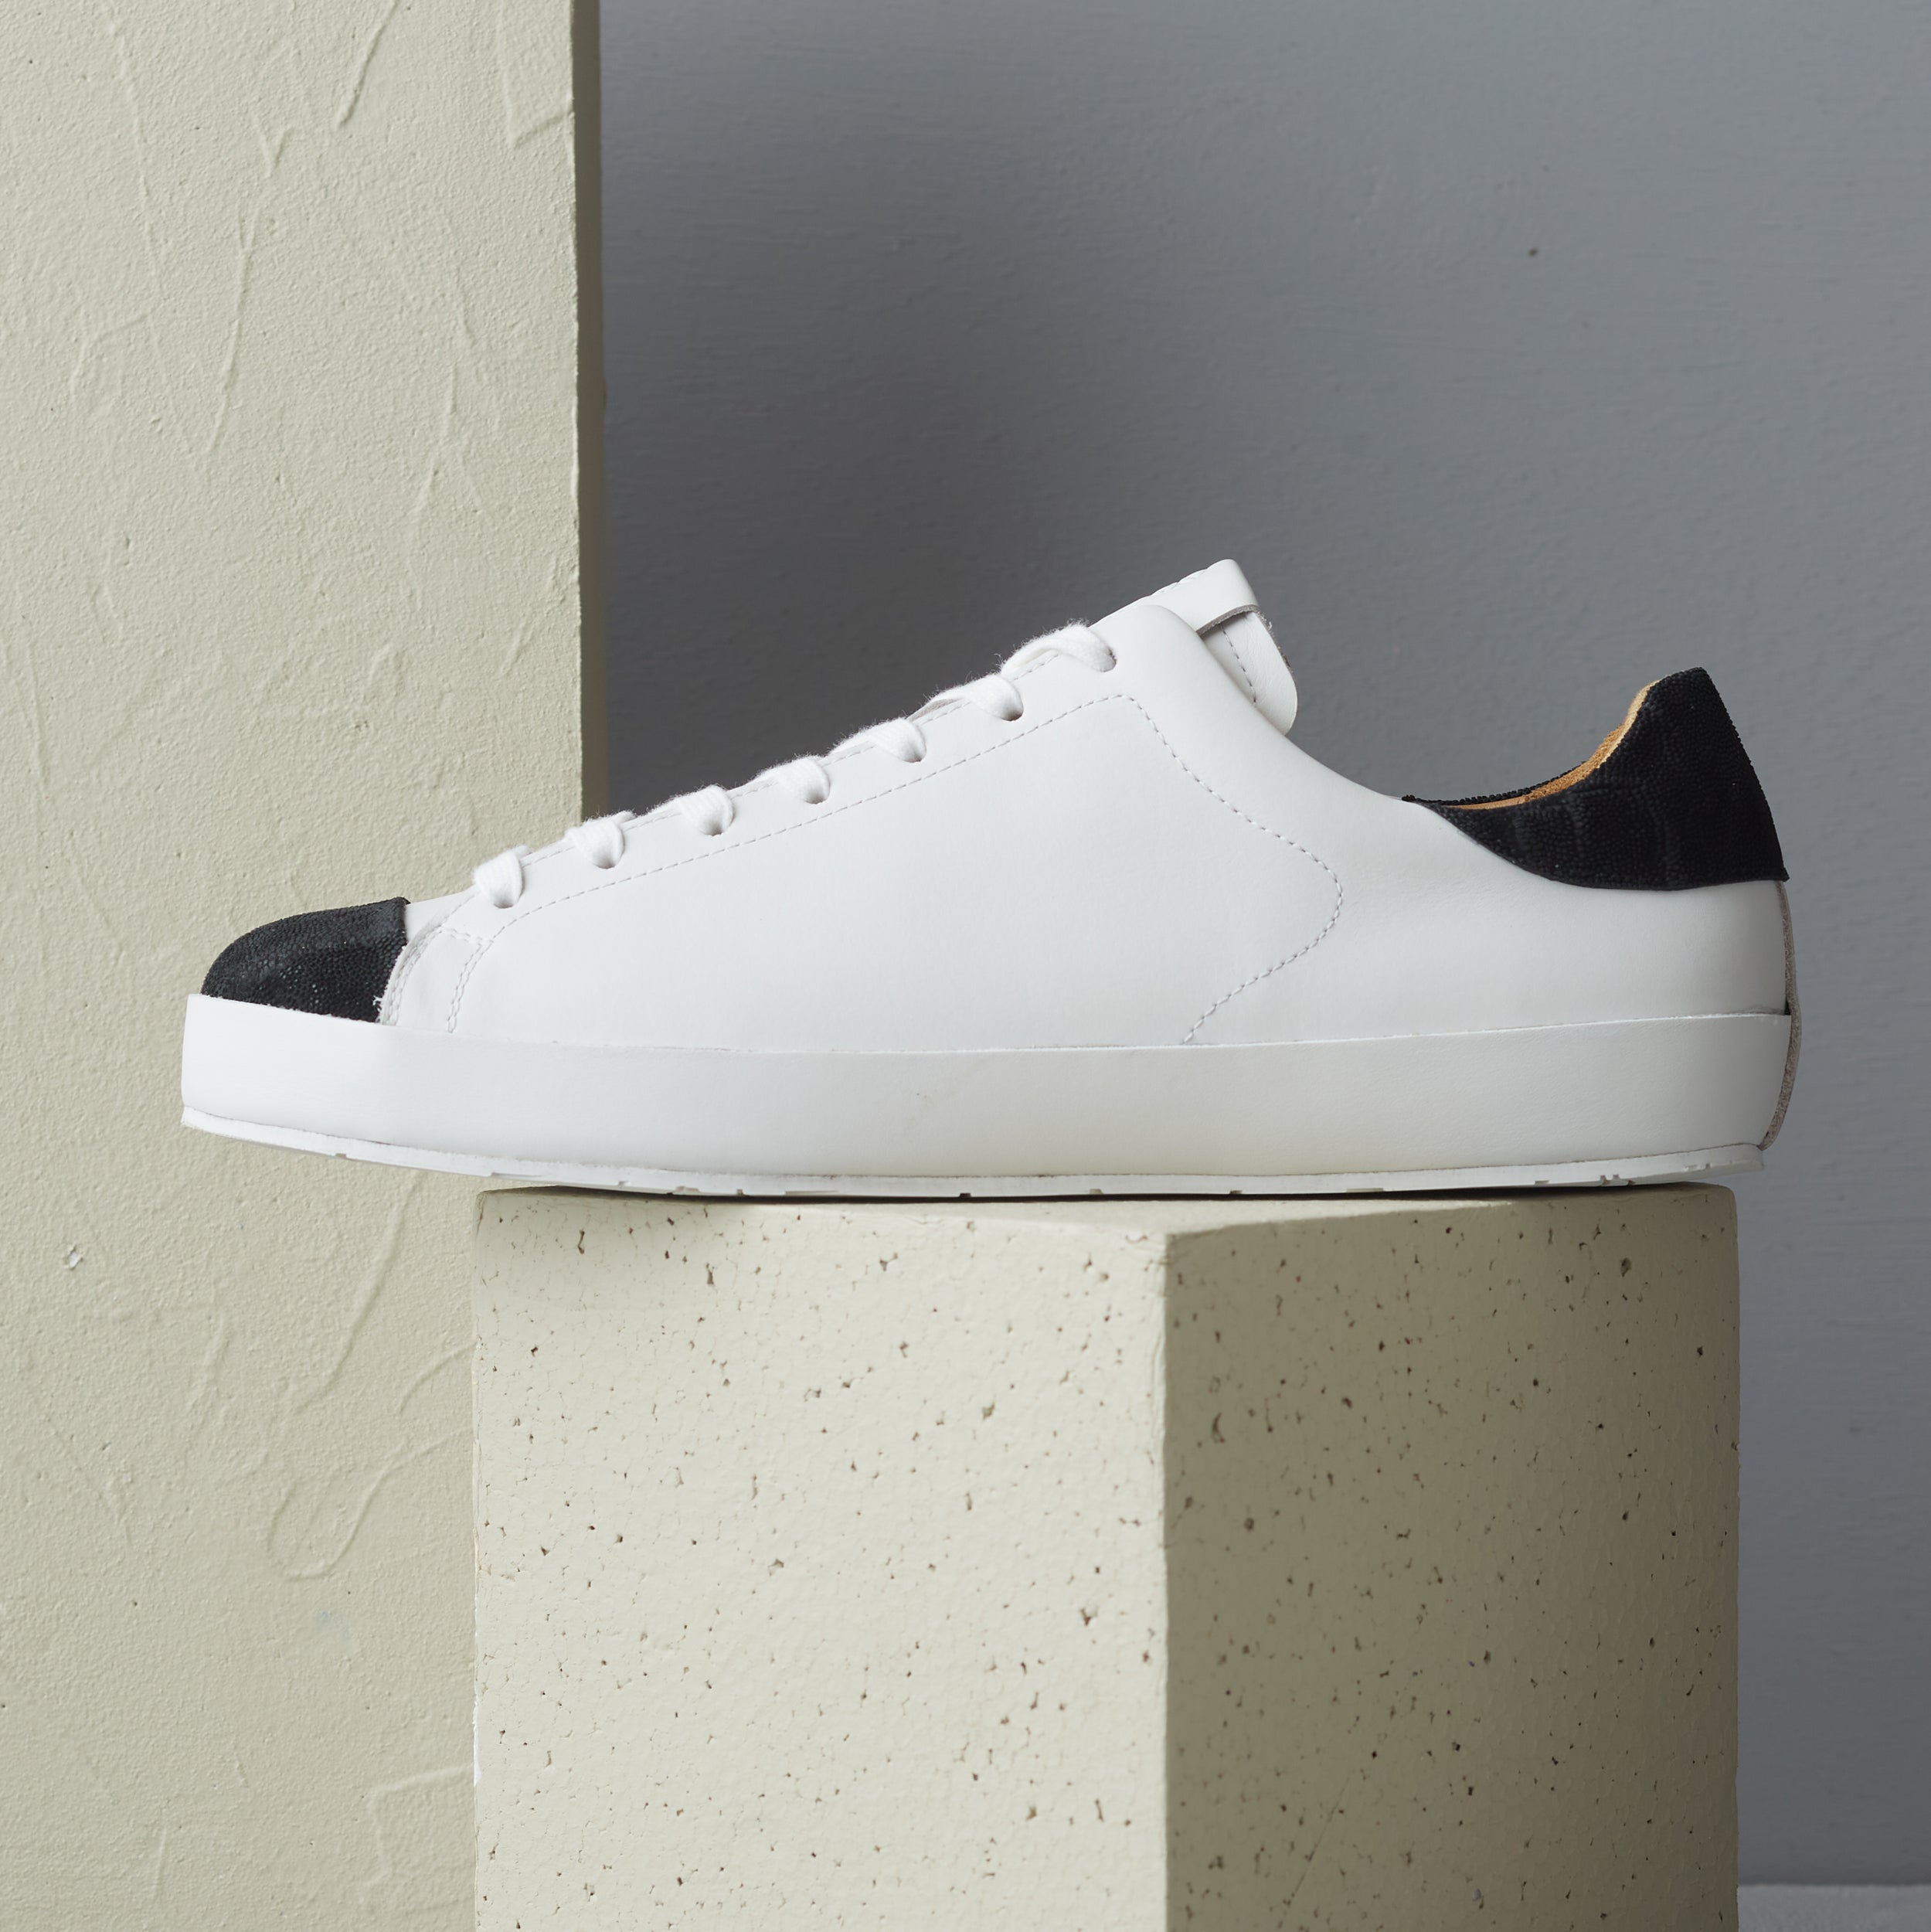 [women's] Liberte - low-top sneakers - combination toe black and white elephant